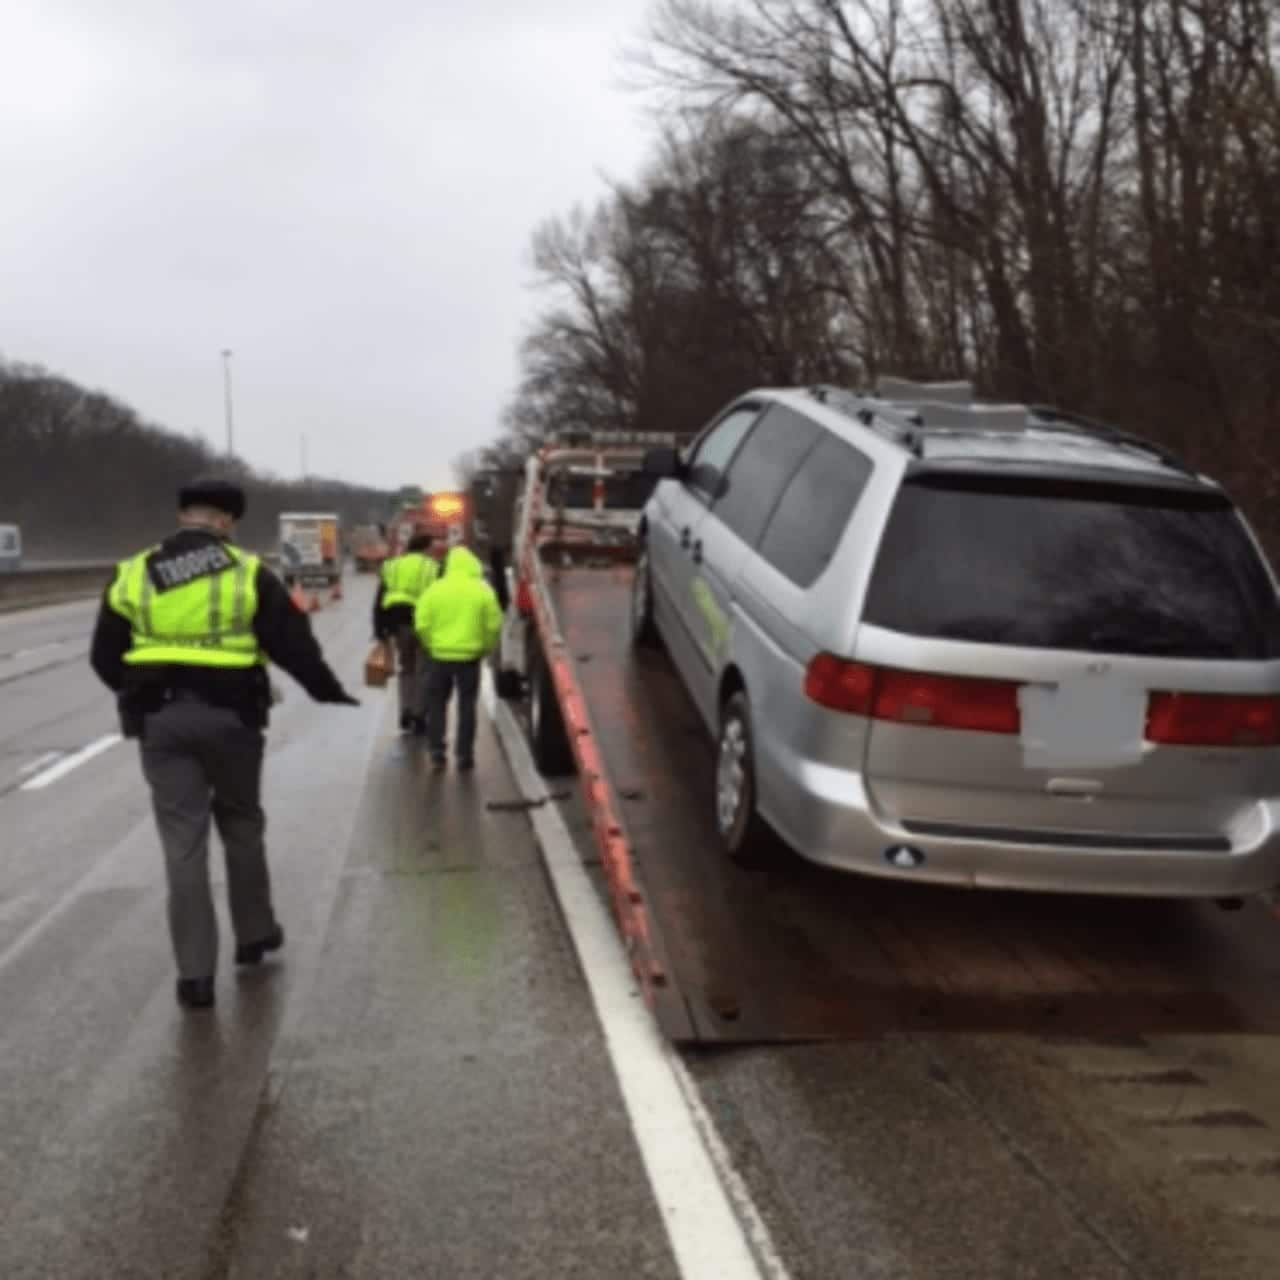 New York State Police are investigating a fatal hit-and-run on I-95.